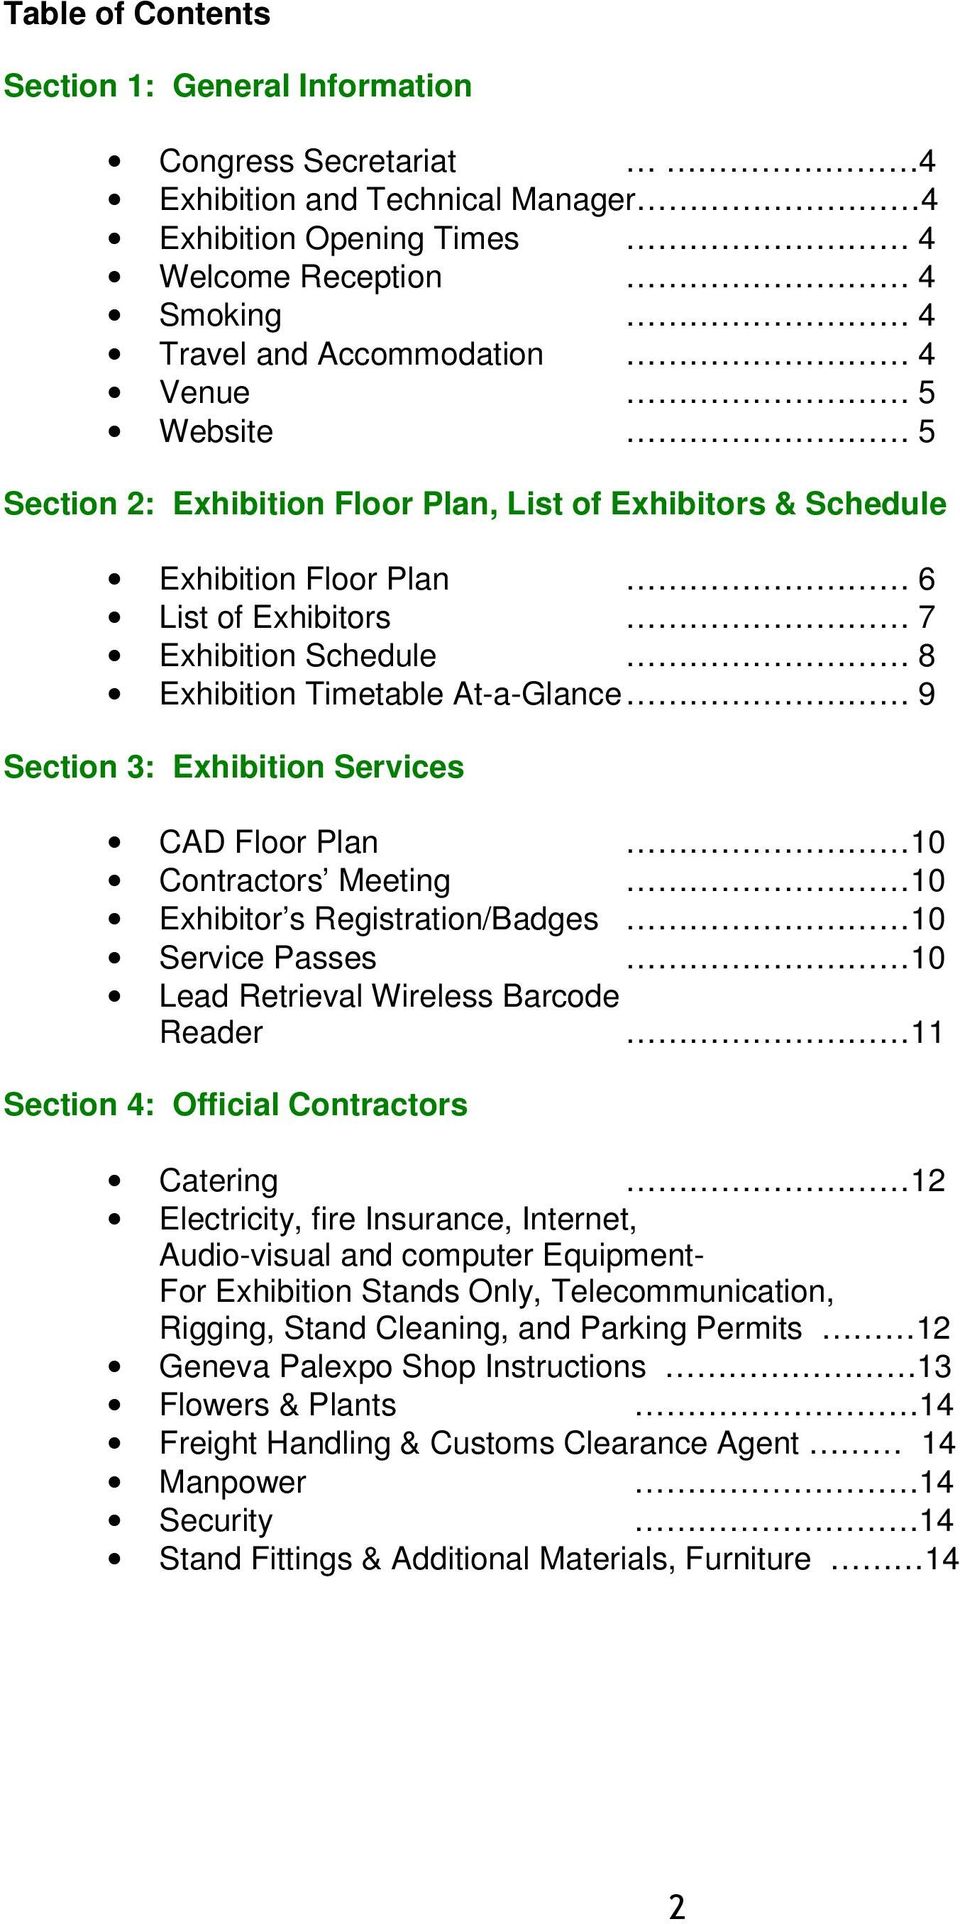 Services CAD Floor Plan 10 Contractors Meeting 10 Exhibitor s Registration/Badges 10 Service Passes 10 Lead Retrieval Wireless Barcode Reader 11 Section 4: Official Contractors Catering 12